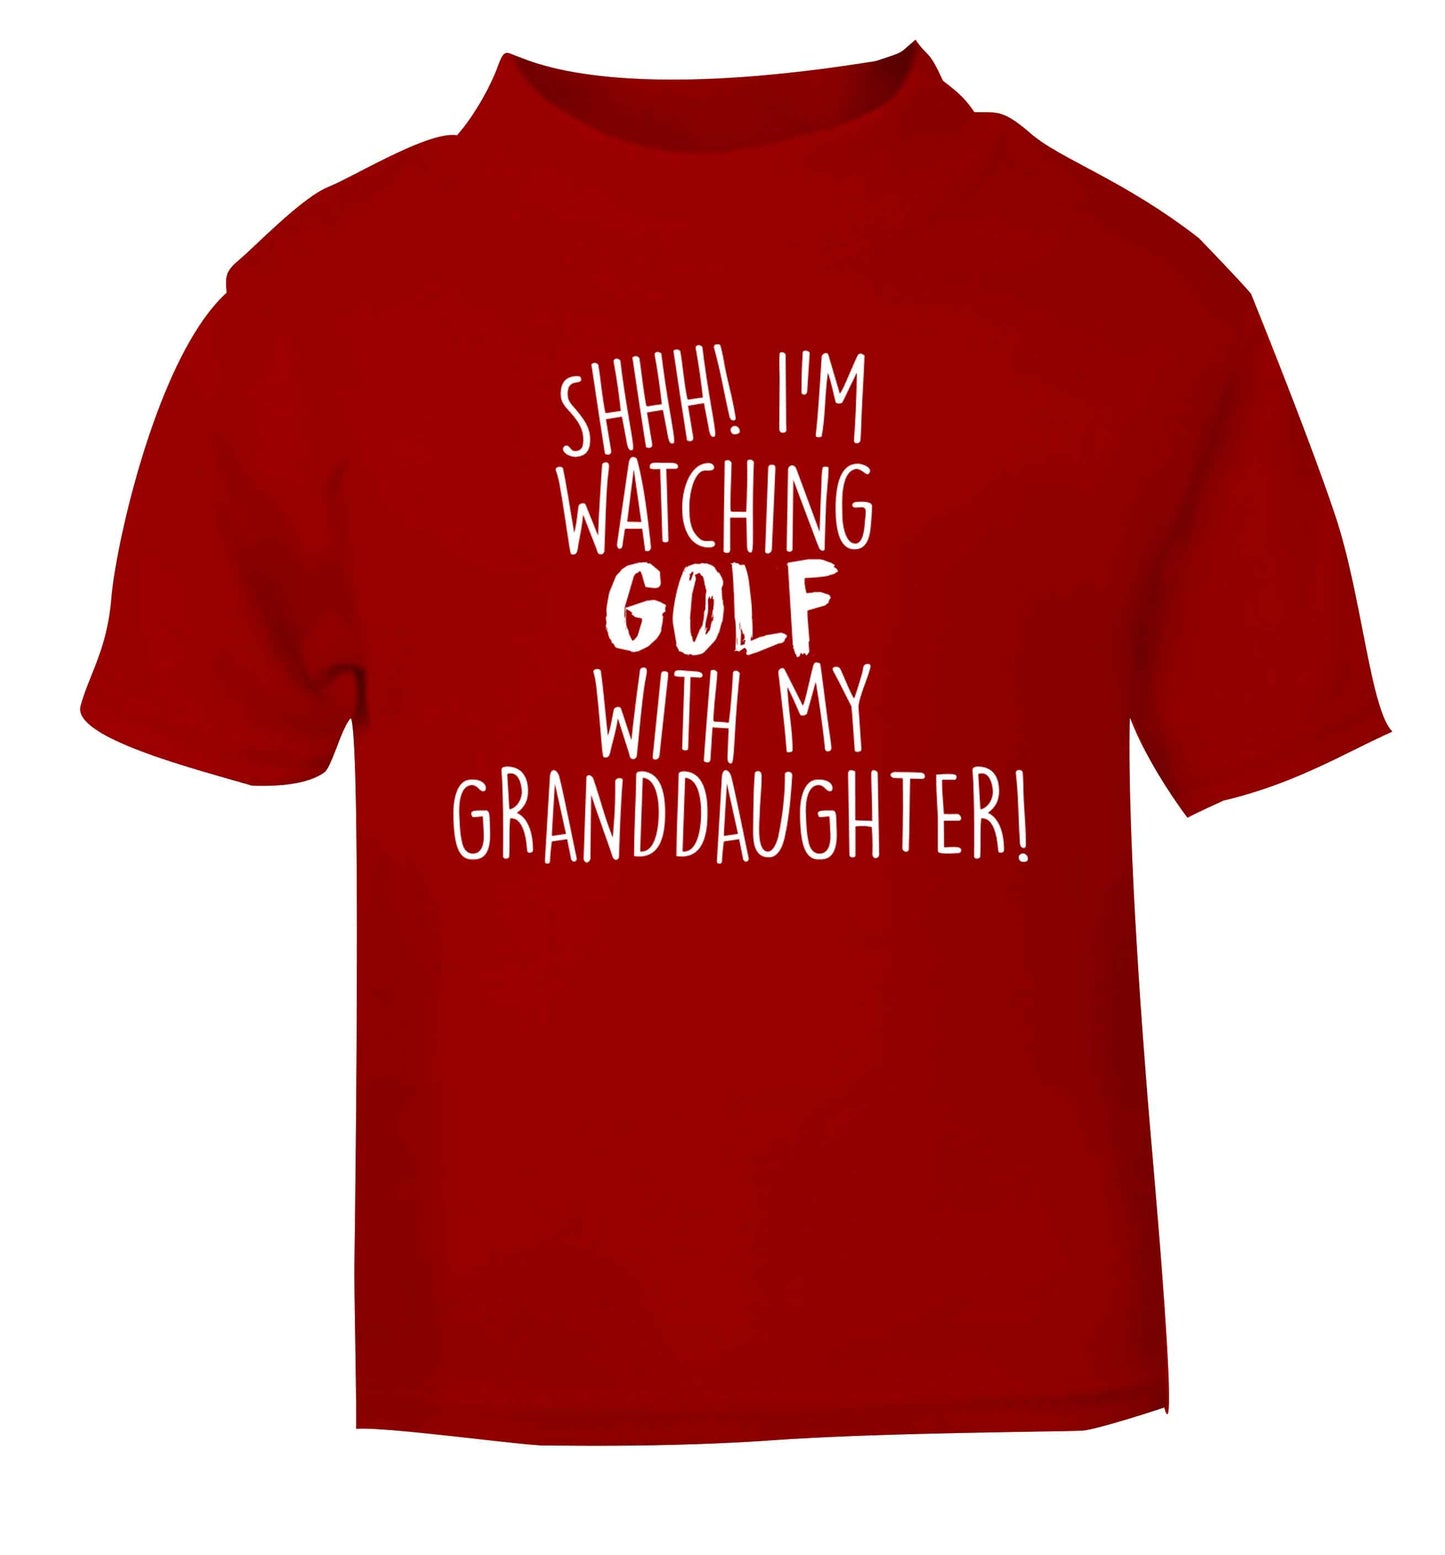 Shh I'm watching golf with my granddaughter red Baby Toddler Tshirt 2 Years